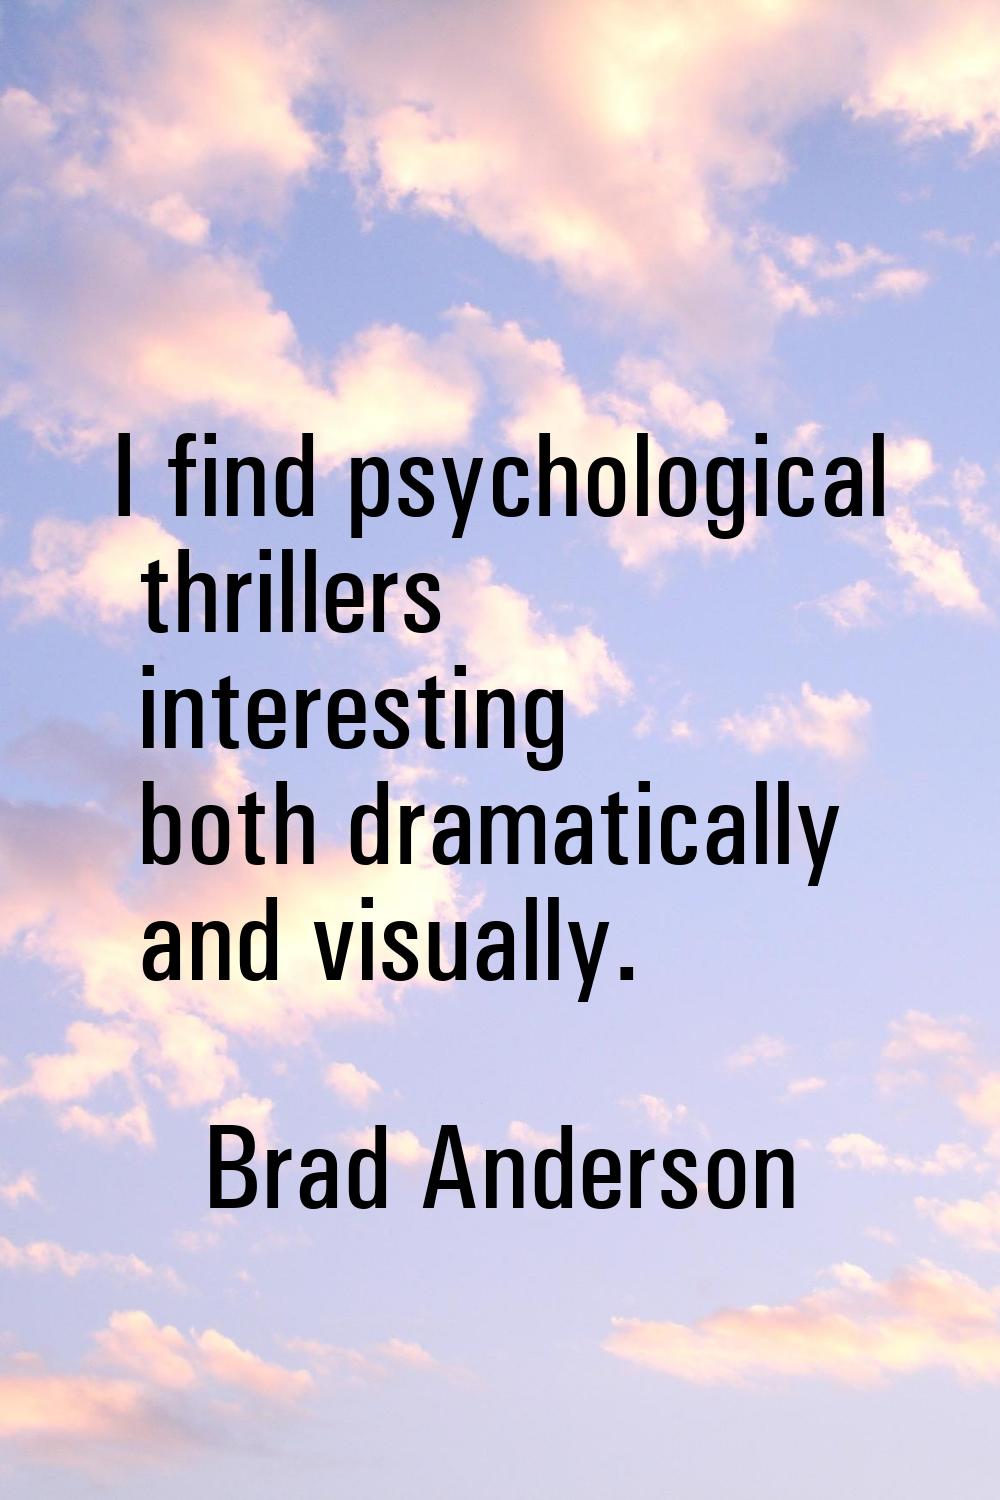 I find psychological thrillers interesting both dramatically and visually.